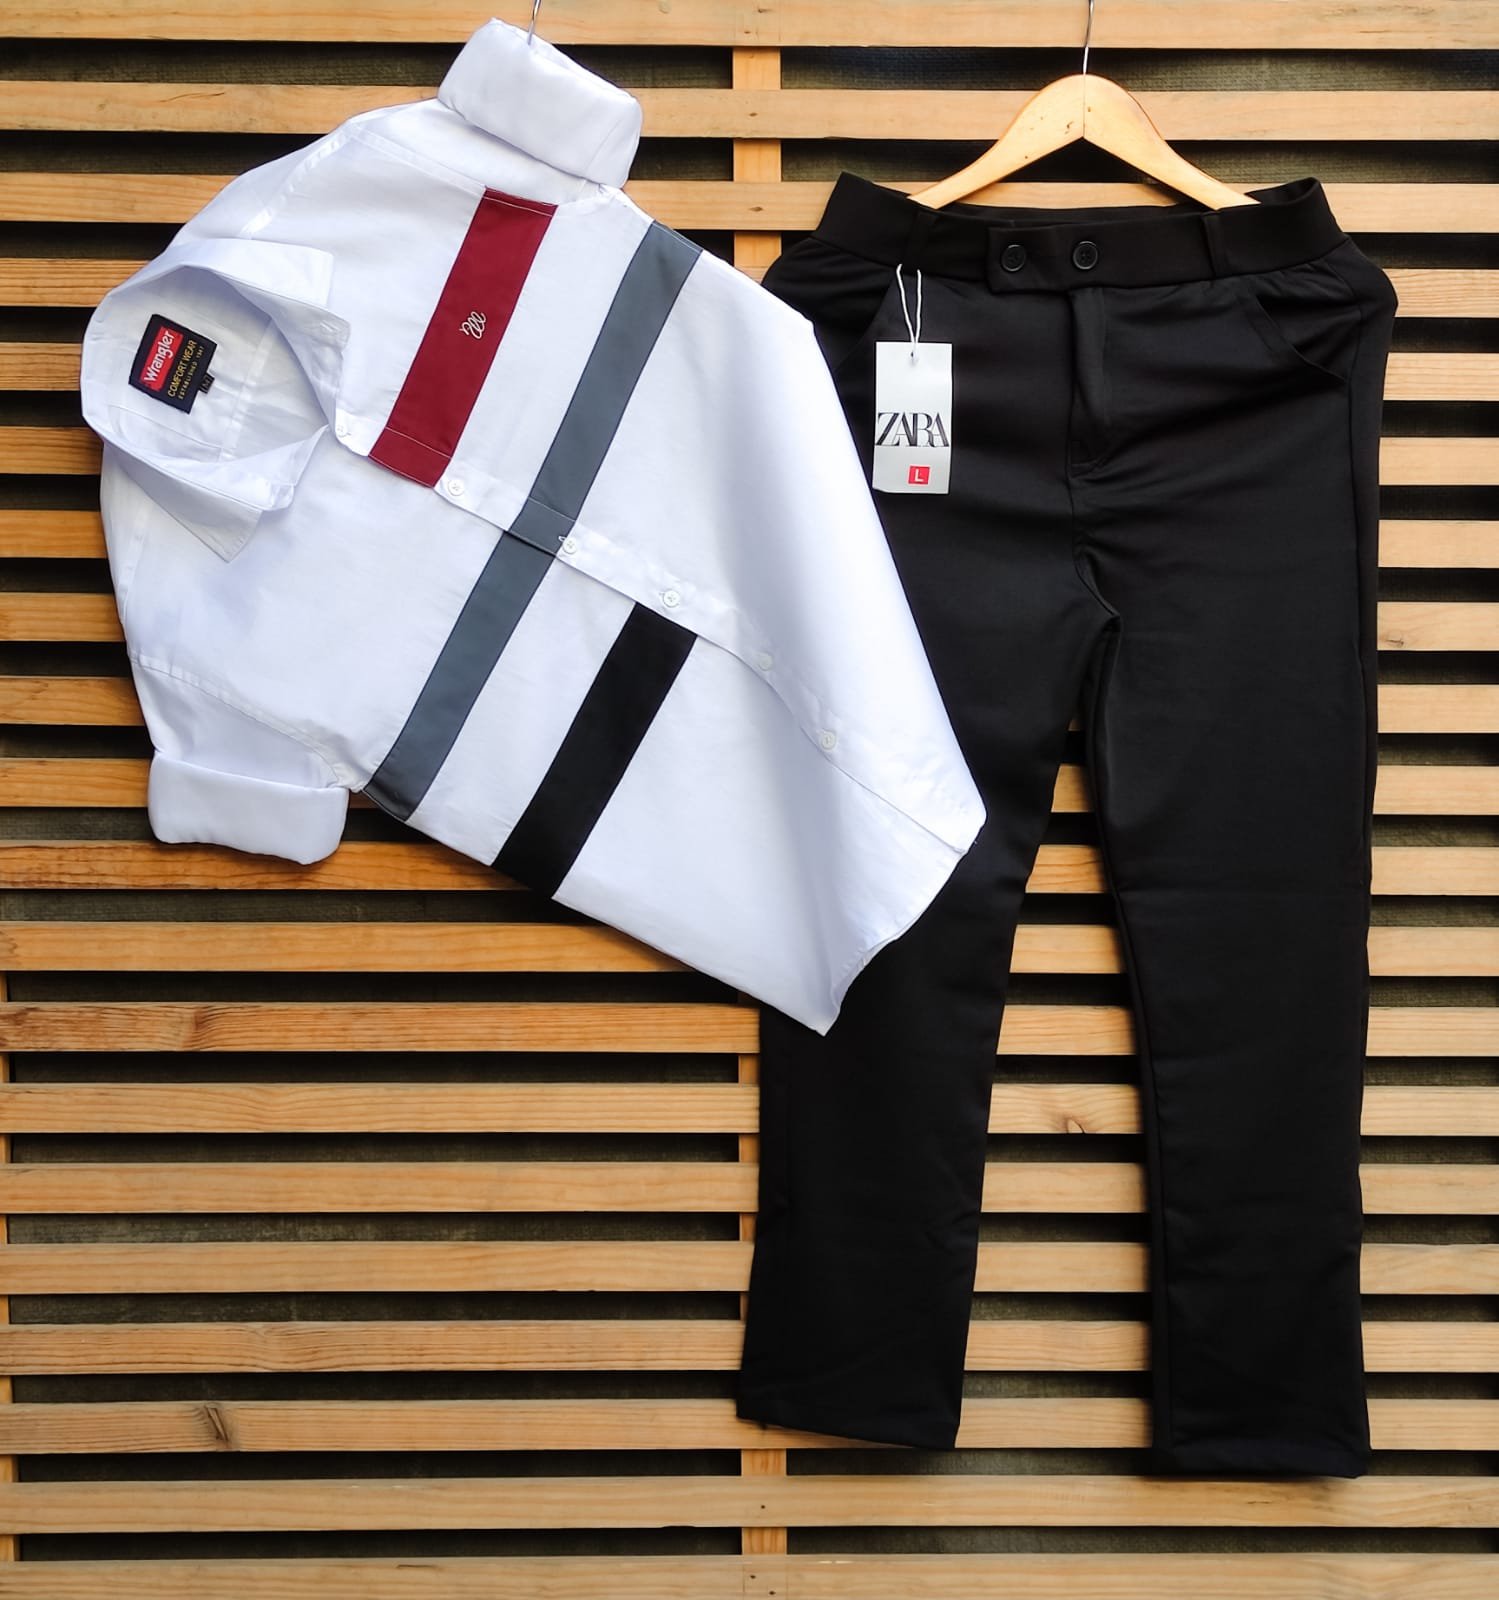 White shirts Matching pants colours | Mens casual outfits summer, Black and  white shirt, Combination pants